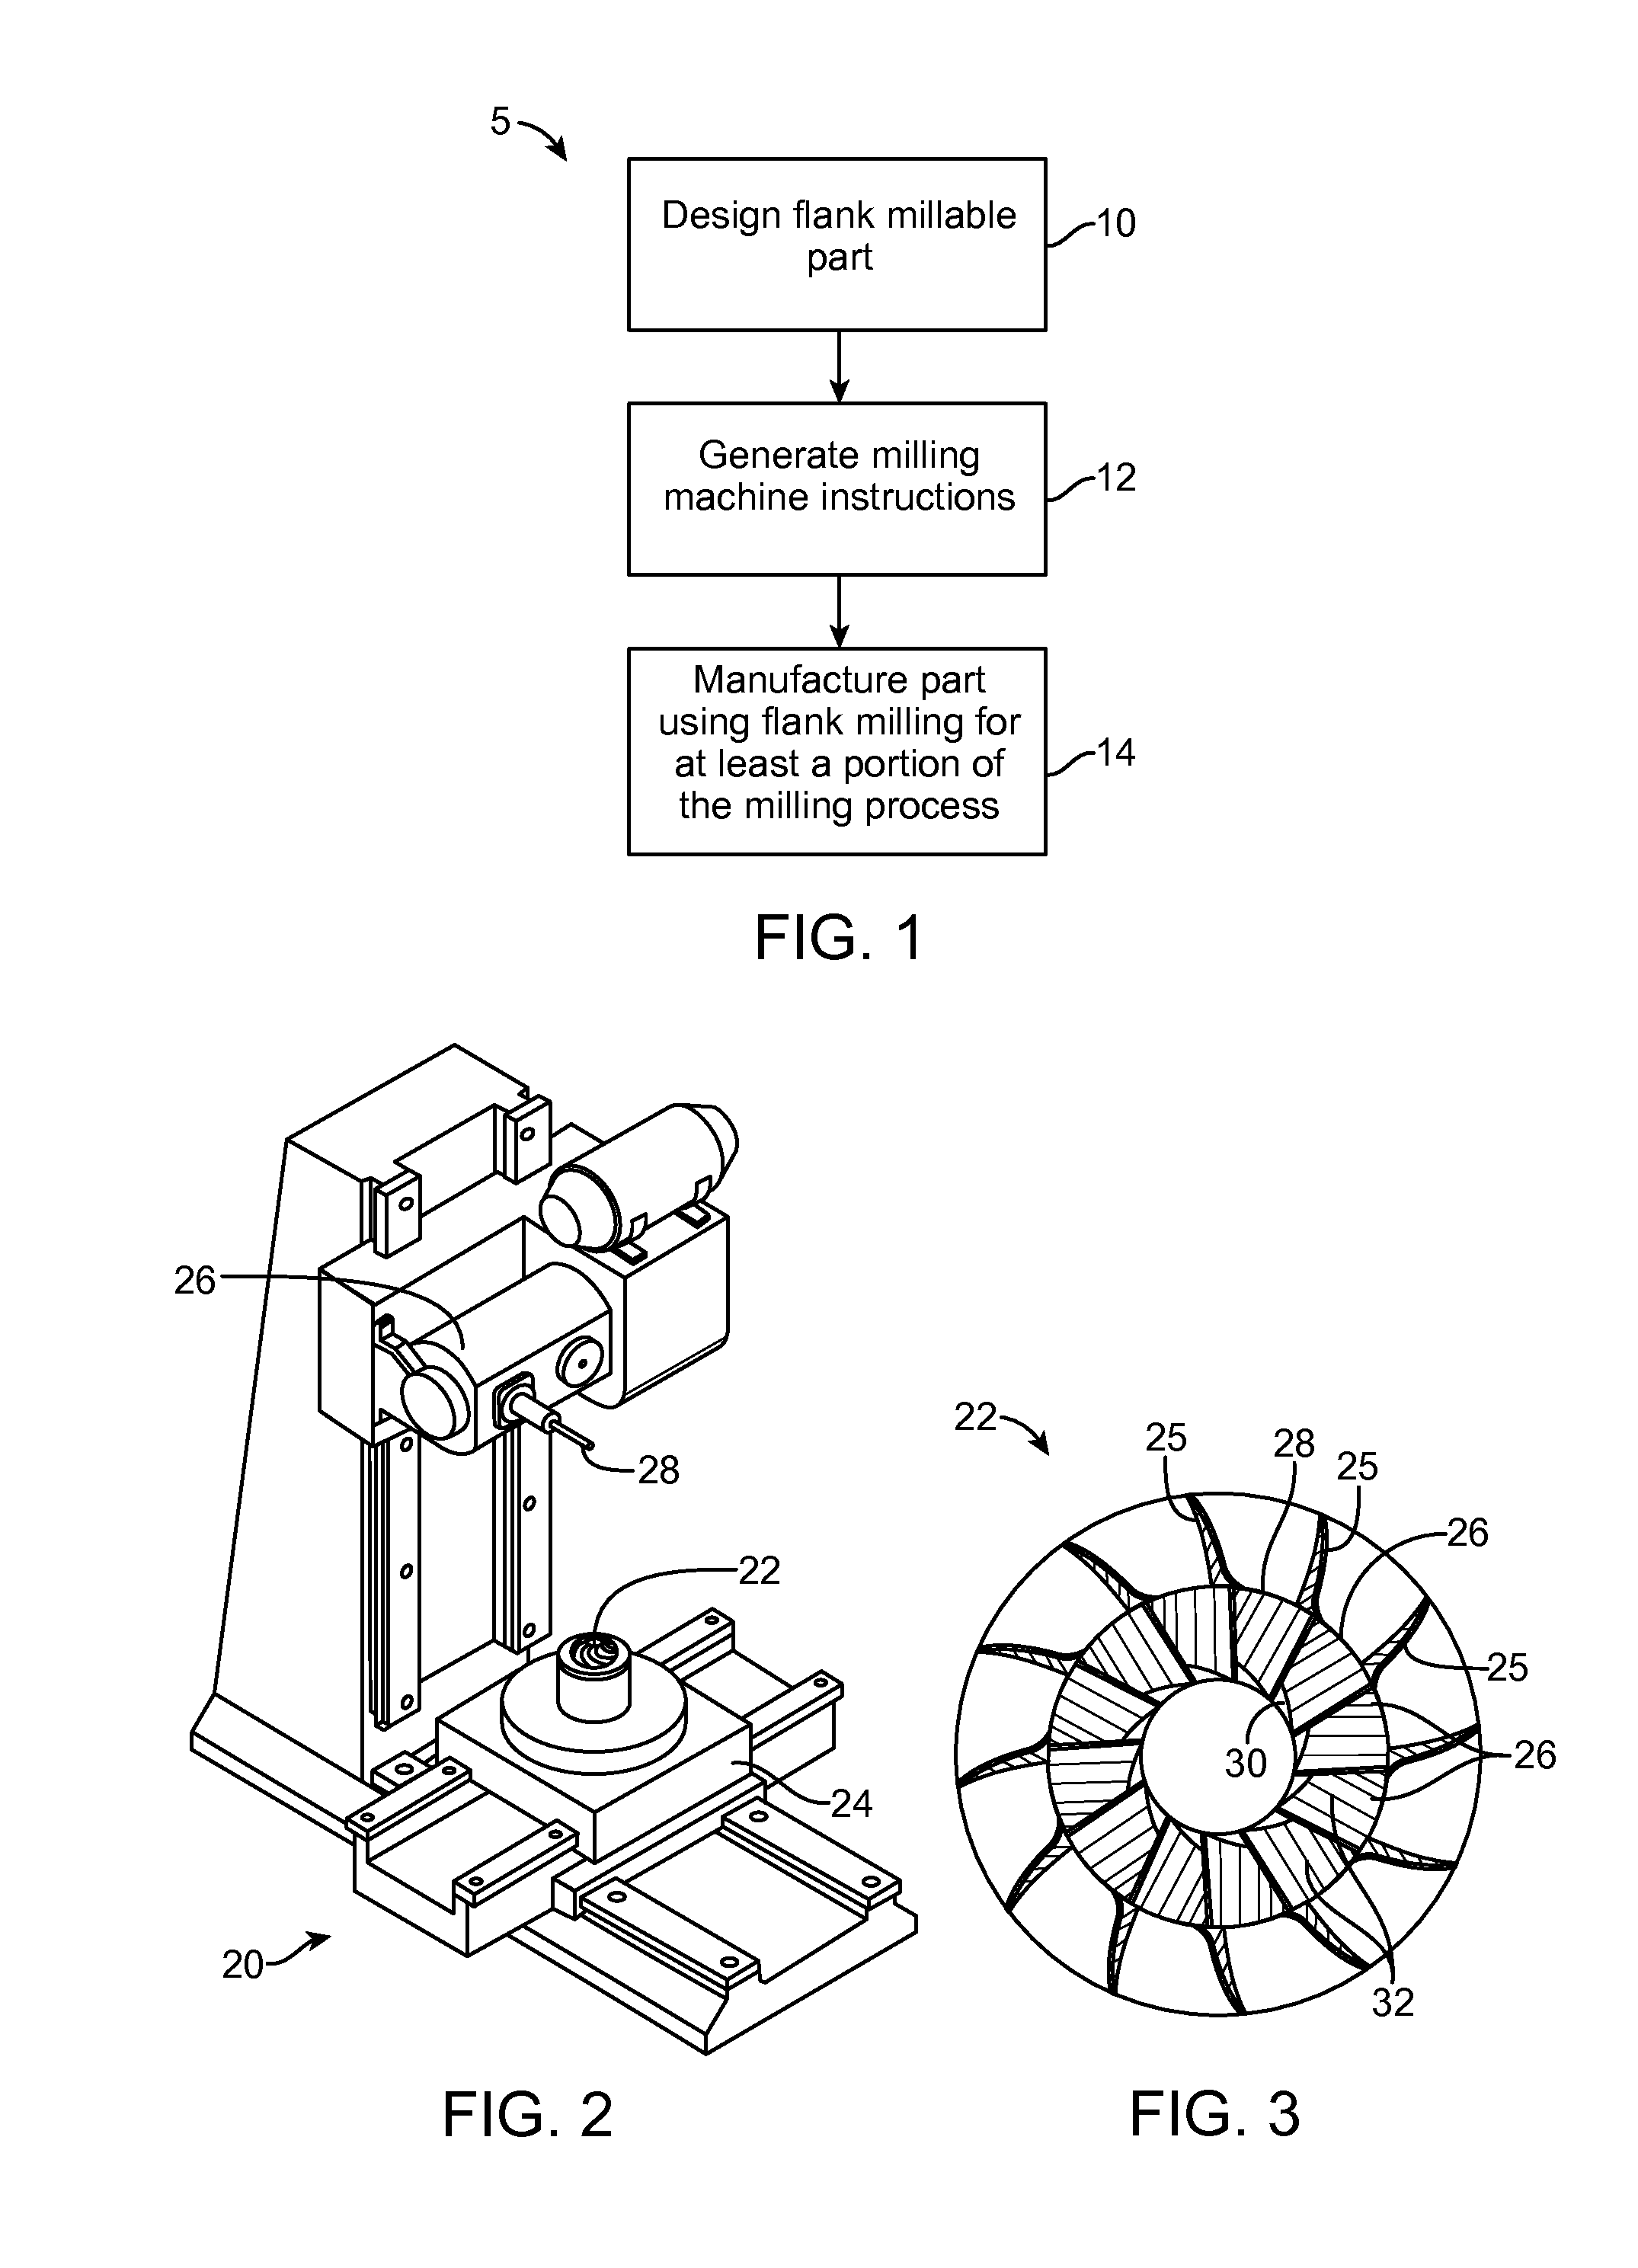 Methods, Systems, And Devices For Designing and Manufacturing Flank Millable Components